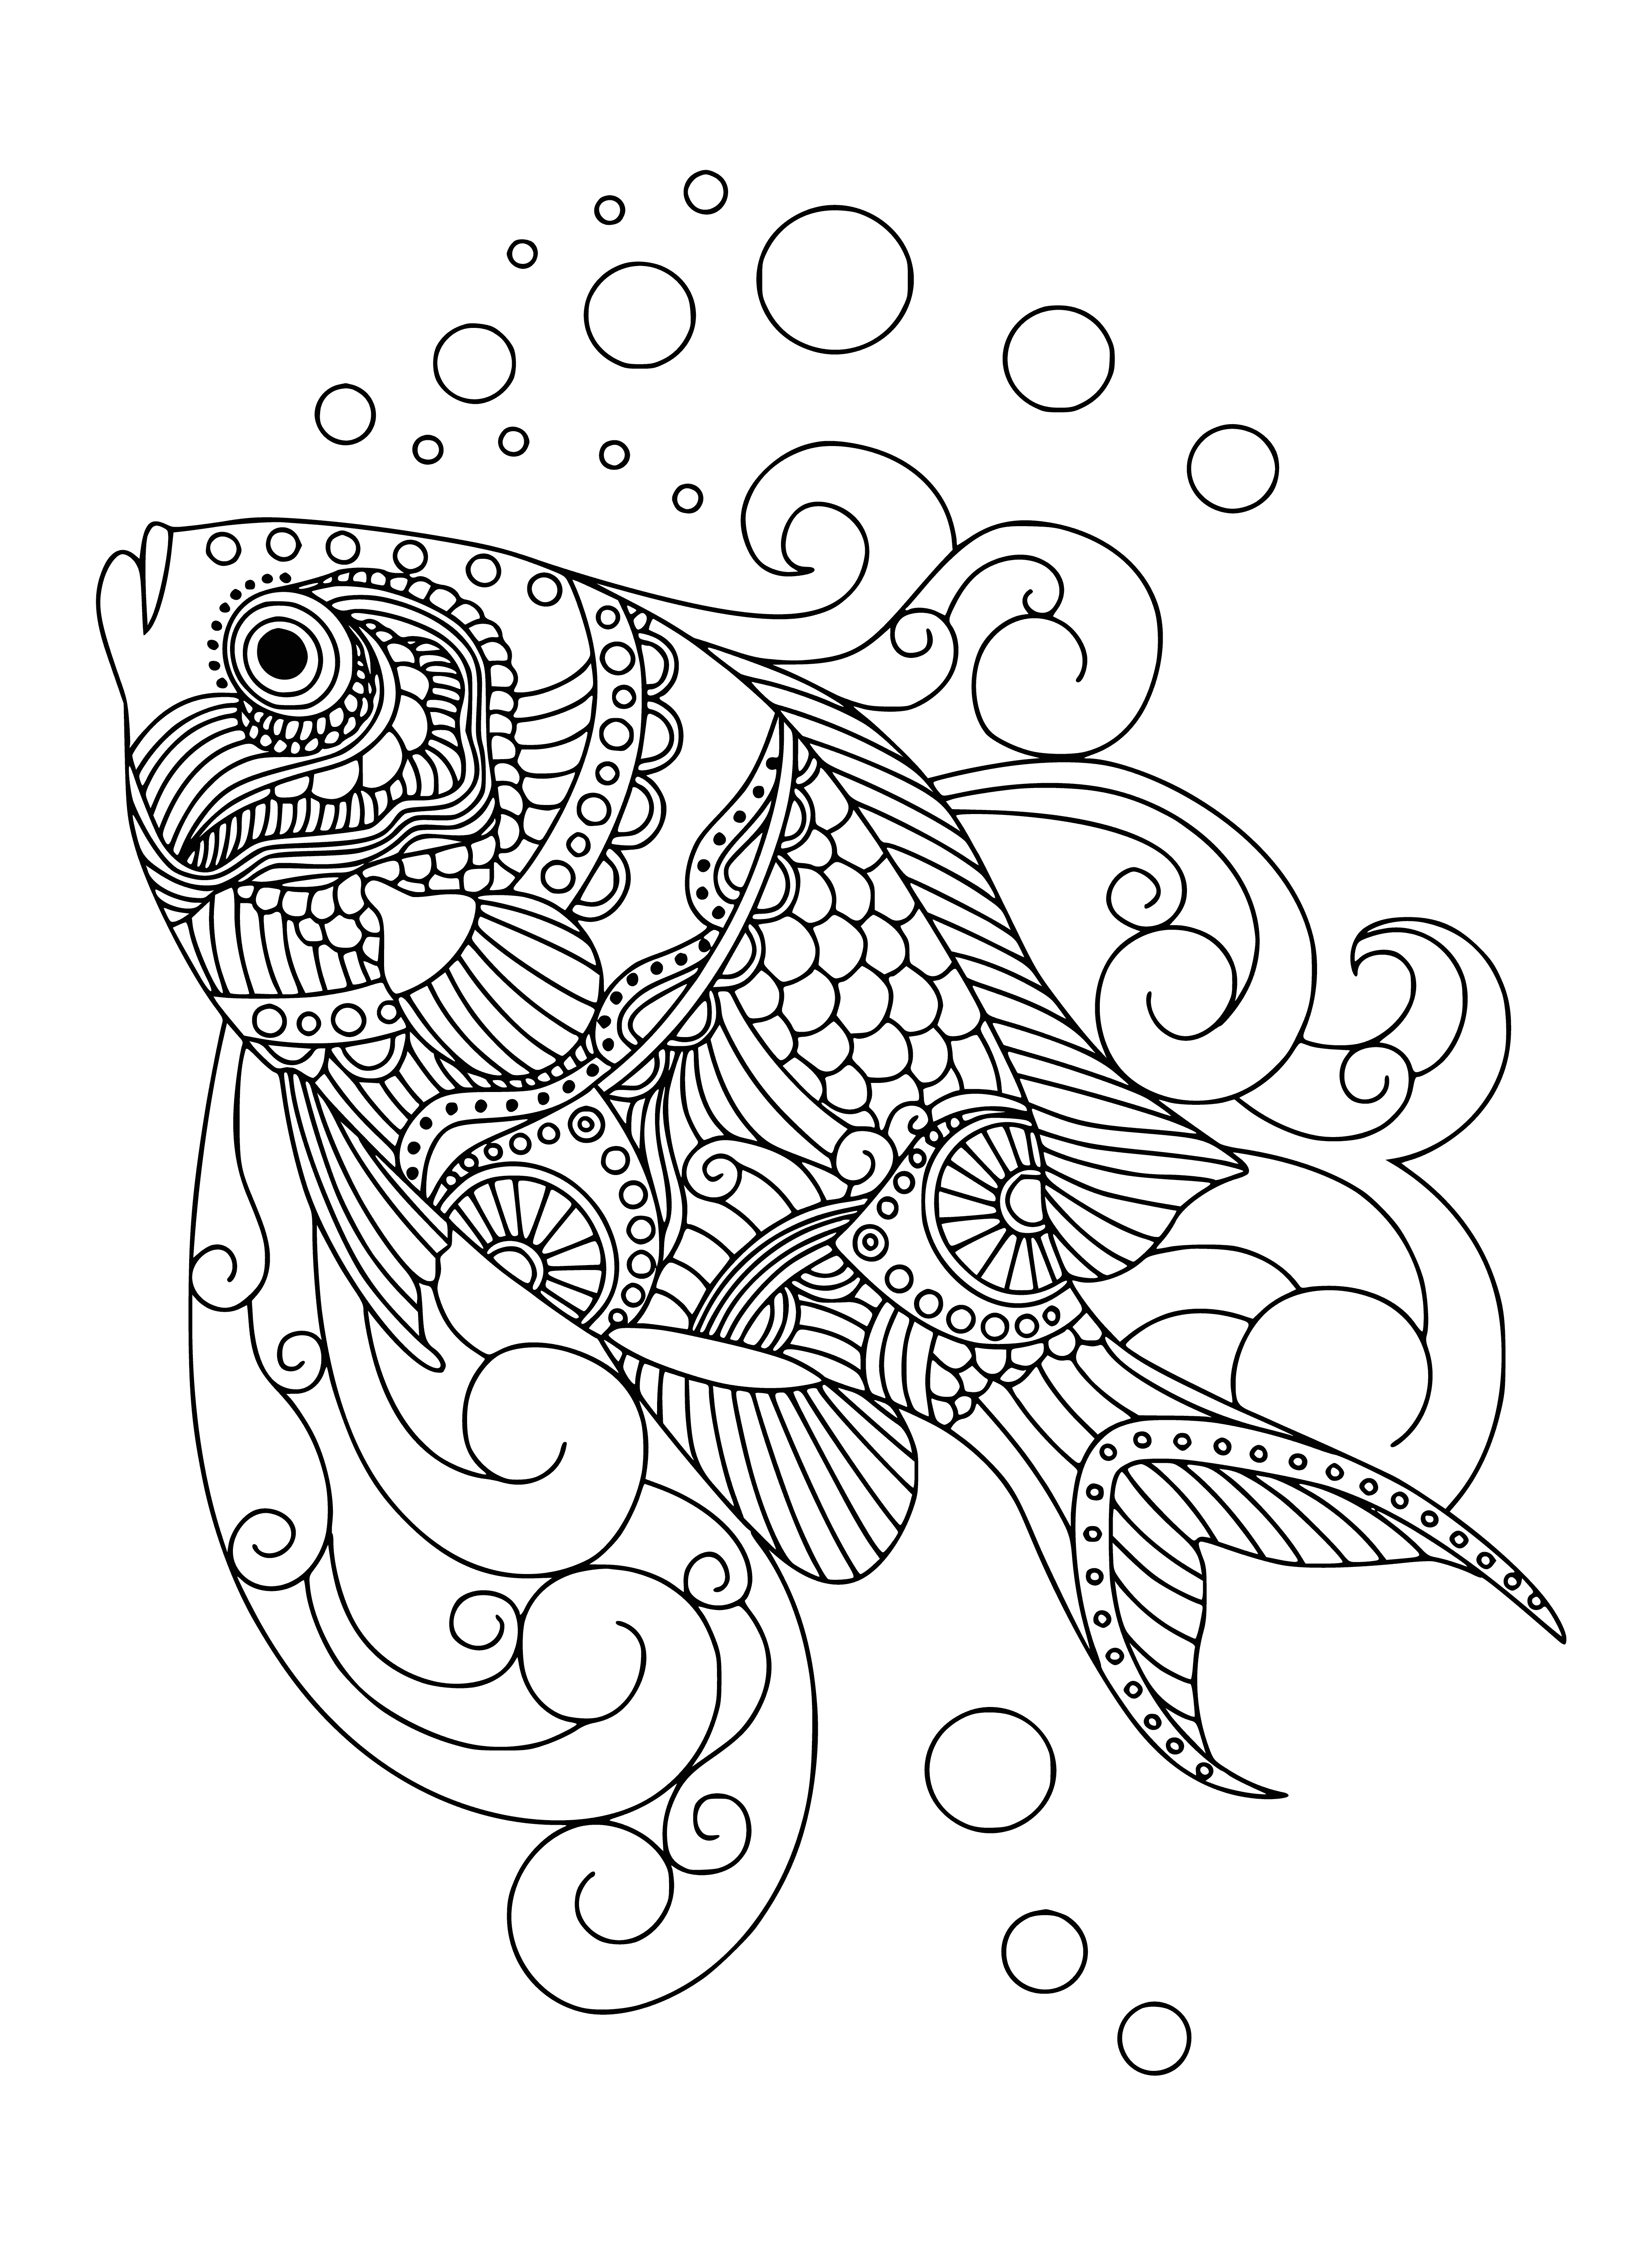 coloring page: Adult Coloring antistress Sea - Small fish has bunch of different colored fish swimming around. #AdultColoring #ColoringBook